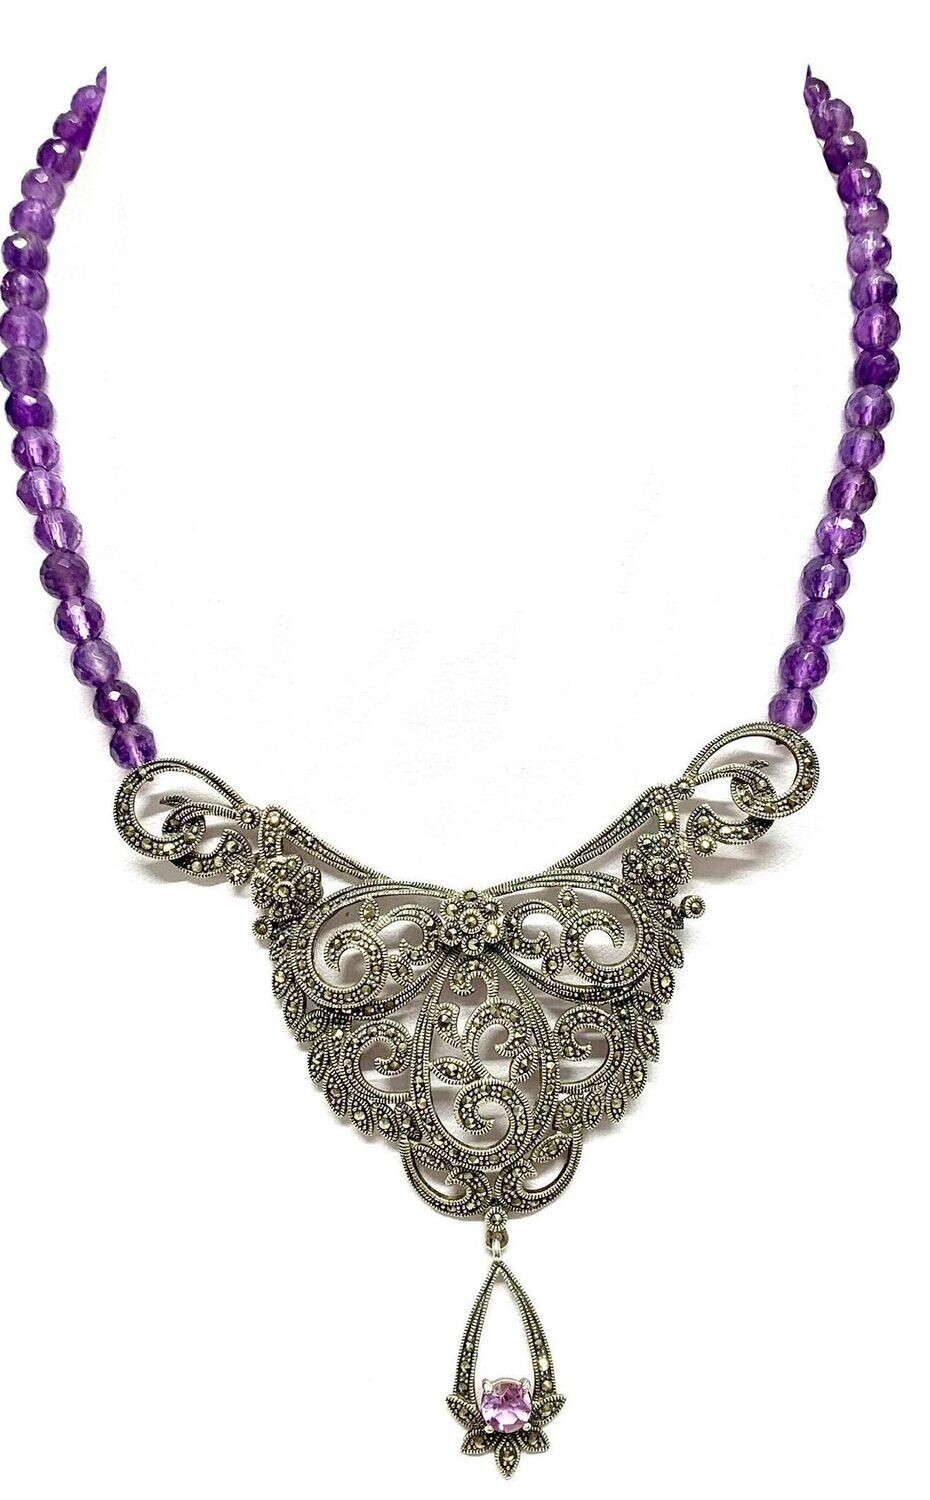 New Silver Marcasite & Amethyst Necklace